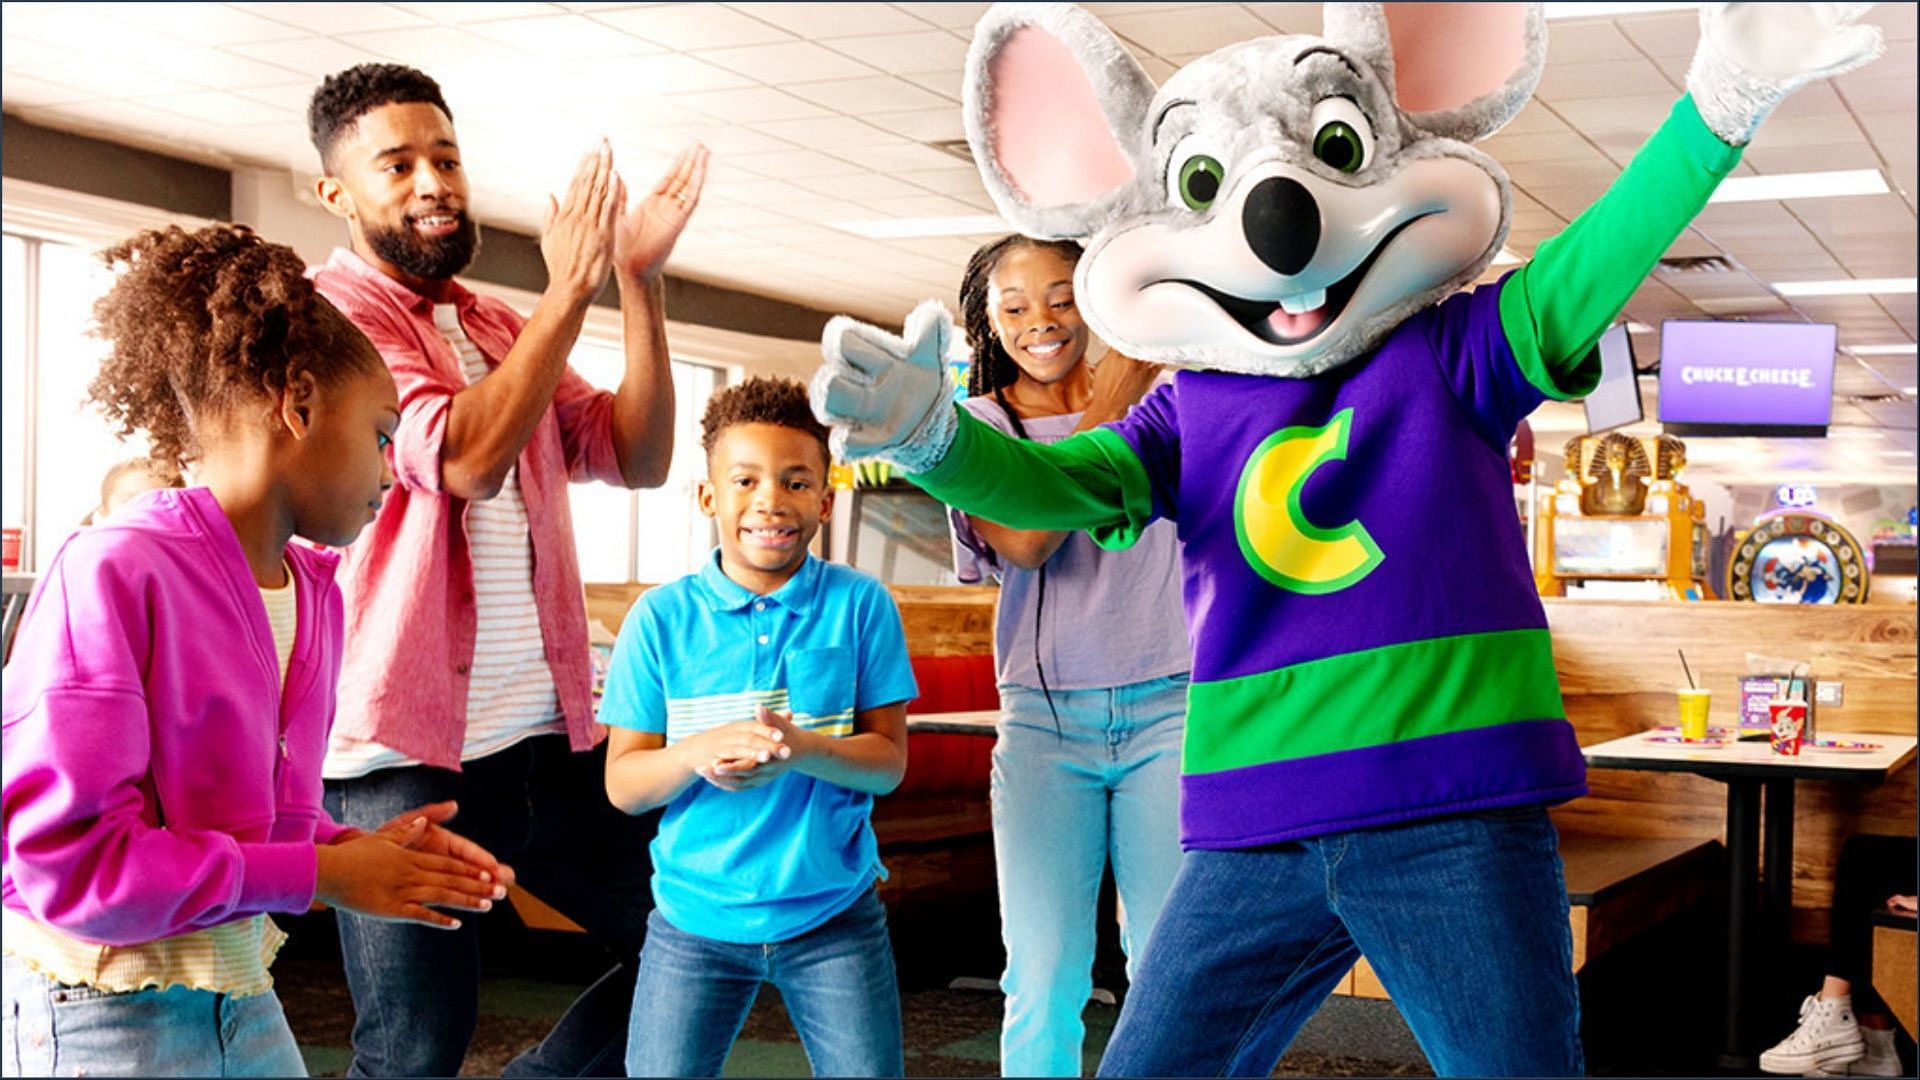 Five Nights At Freddy's Causes Chuck E. Cheese To Remove All Animatronics?